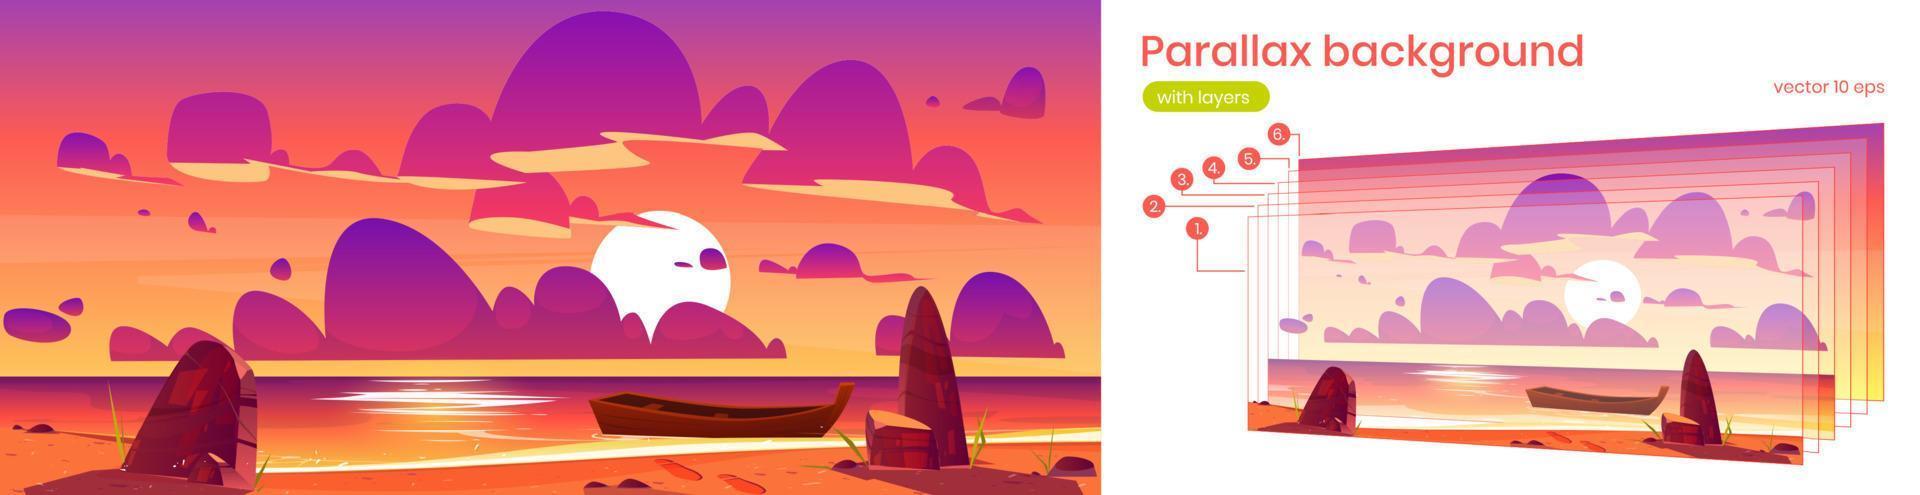 Parallax background, sunset in ocean with boat vector